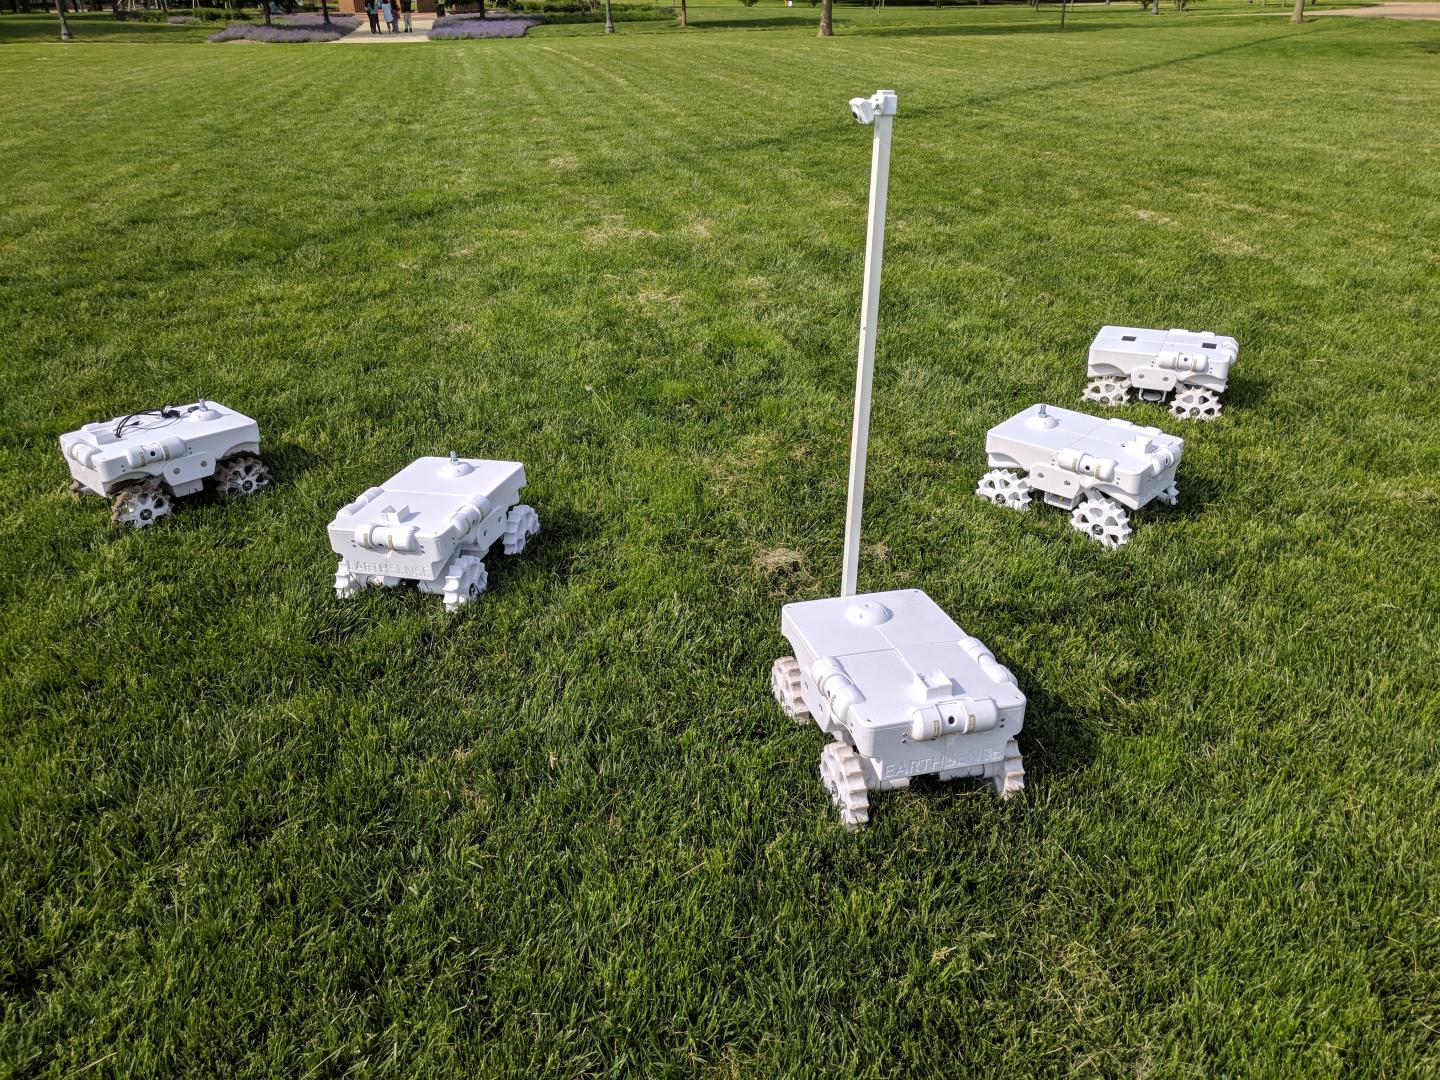 Developed by the University of Illinois, the TerraSentia robot that autonomously monitors crops earned the best systems paper award at Robotics: Science and Systems, the preeminent robotics conference held in Pittsburgh.